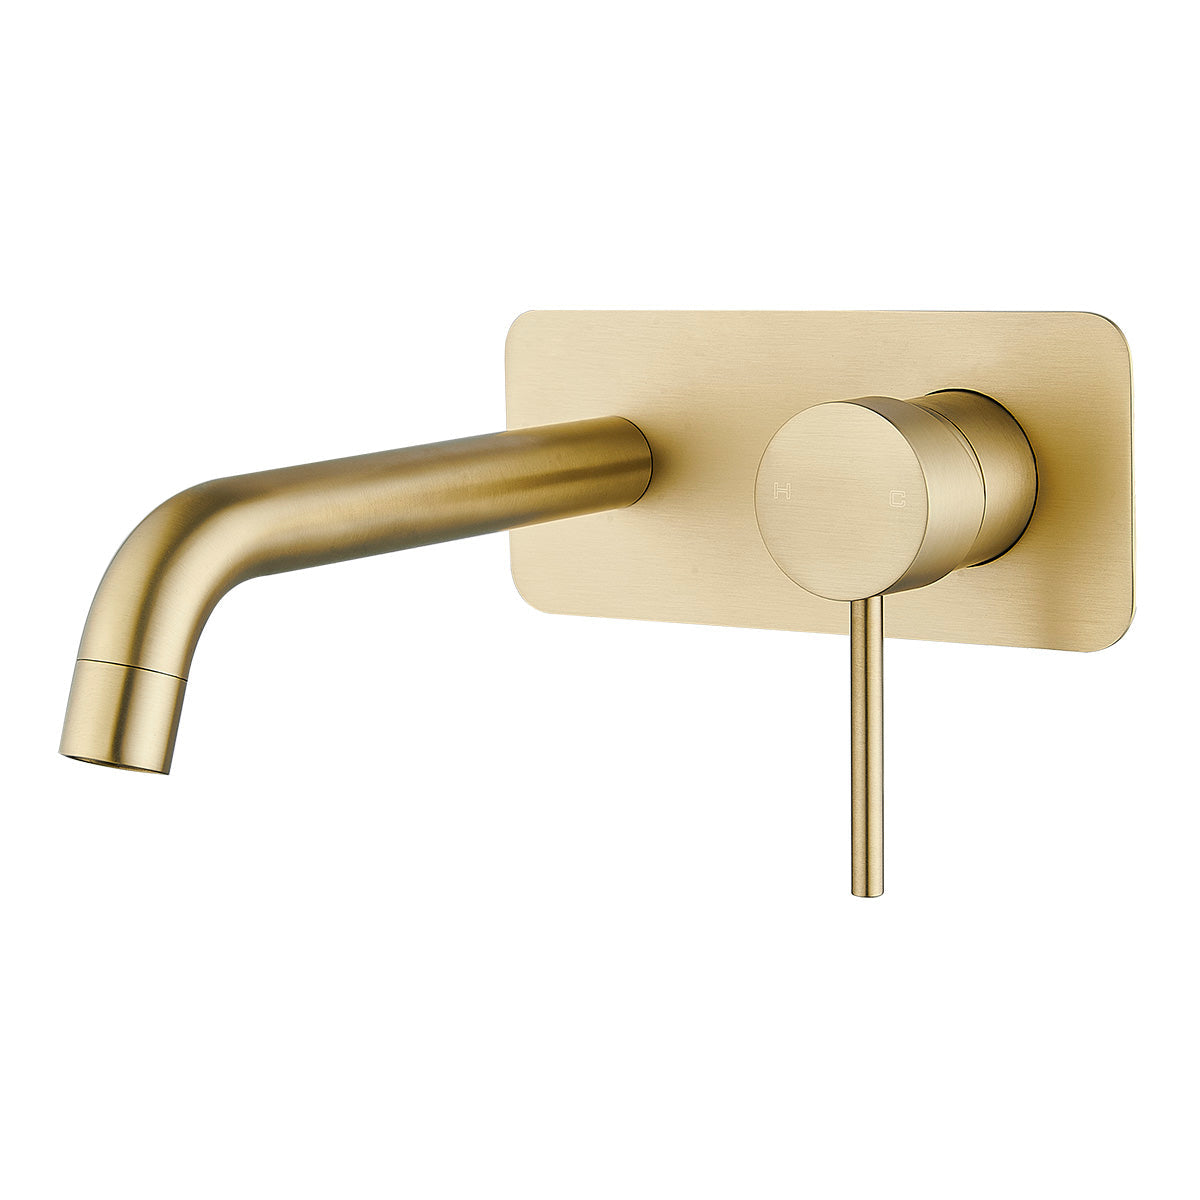 IDWS2 (BG) / Ideal Wall Mixer With Outlet (Brushed Gold) - Hellycar Brushed Gold Wall Basin Mixer - Bathroom Mixer Tap